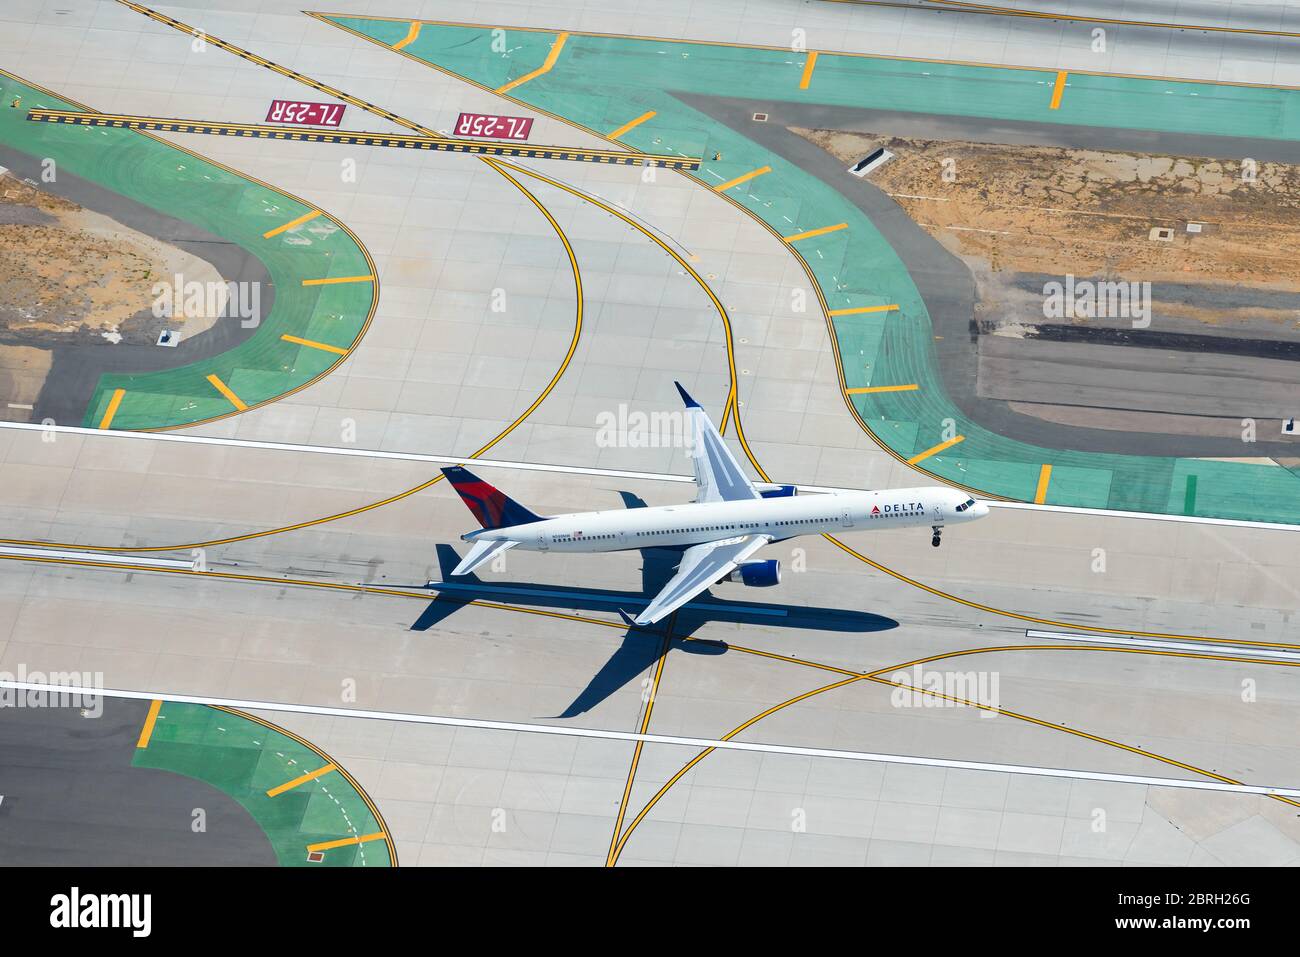 Delta Airlines Boeing 757 departing LAX International Airport. Aerial view of airplane taking off with airport taxiway lines below. 757-300 N588NW. Stock Photo